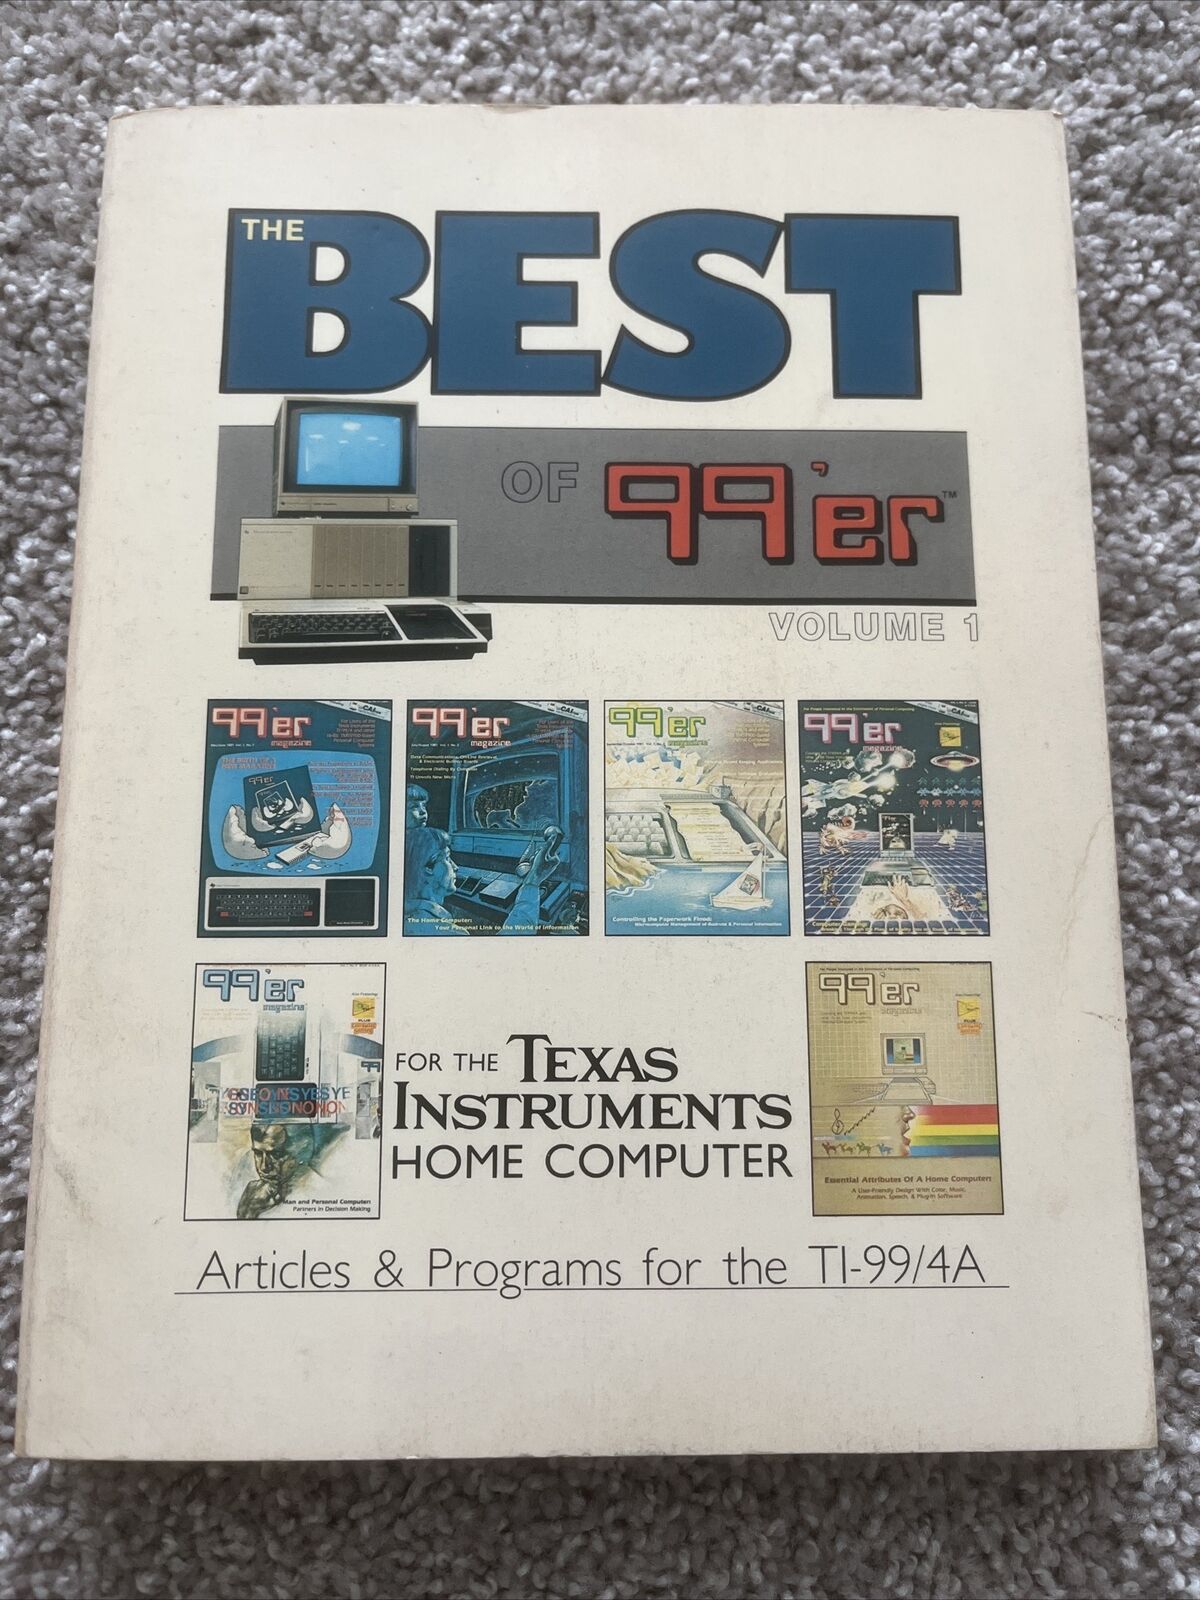 The Best of 99\'er Volume 1  Articles & Programs For TI-99/4A W/Original Receipt